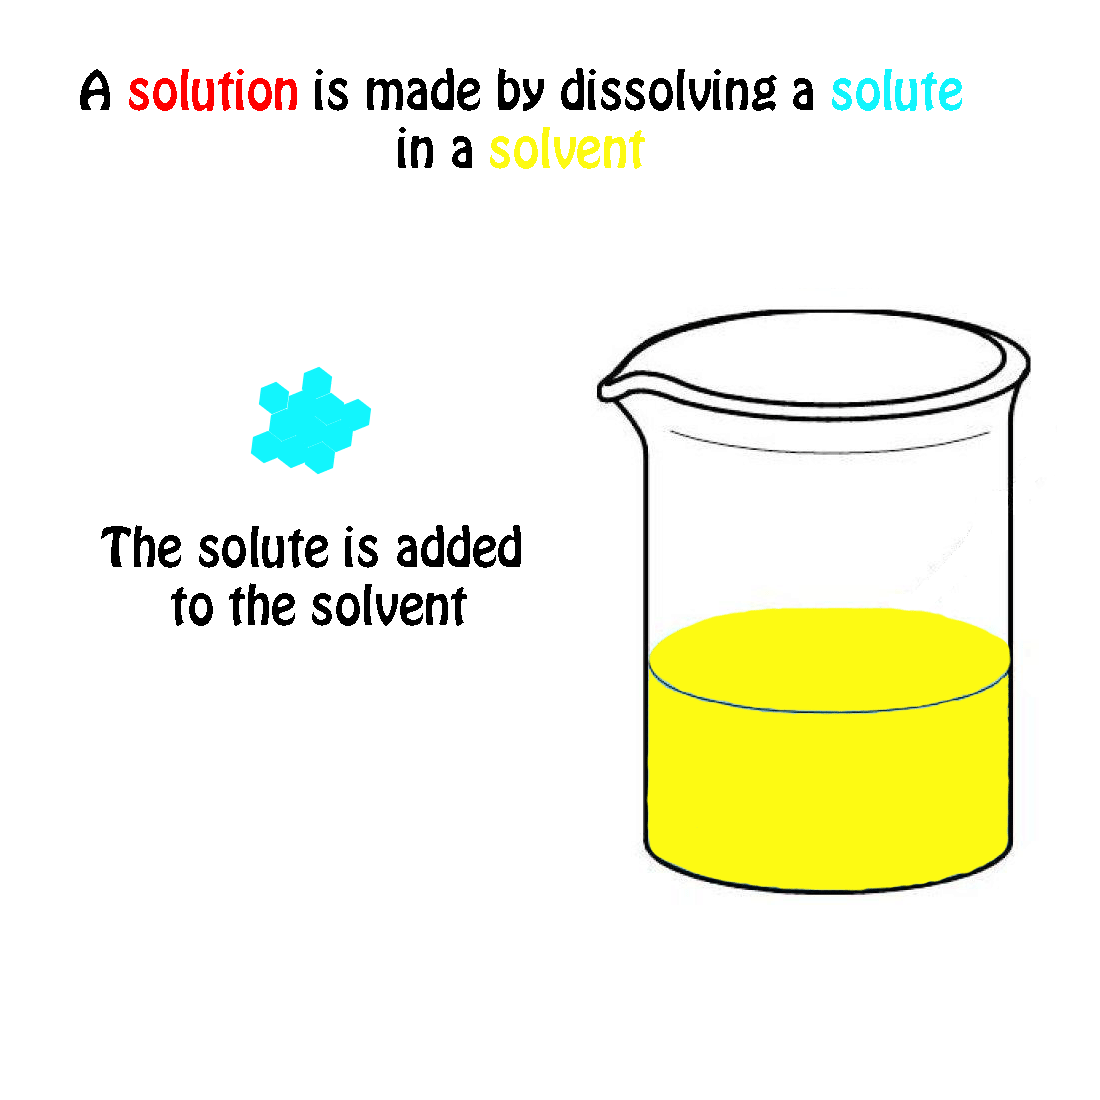 What is the relationship among solutions, solutes, and solvents? | Socratic